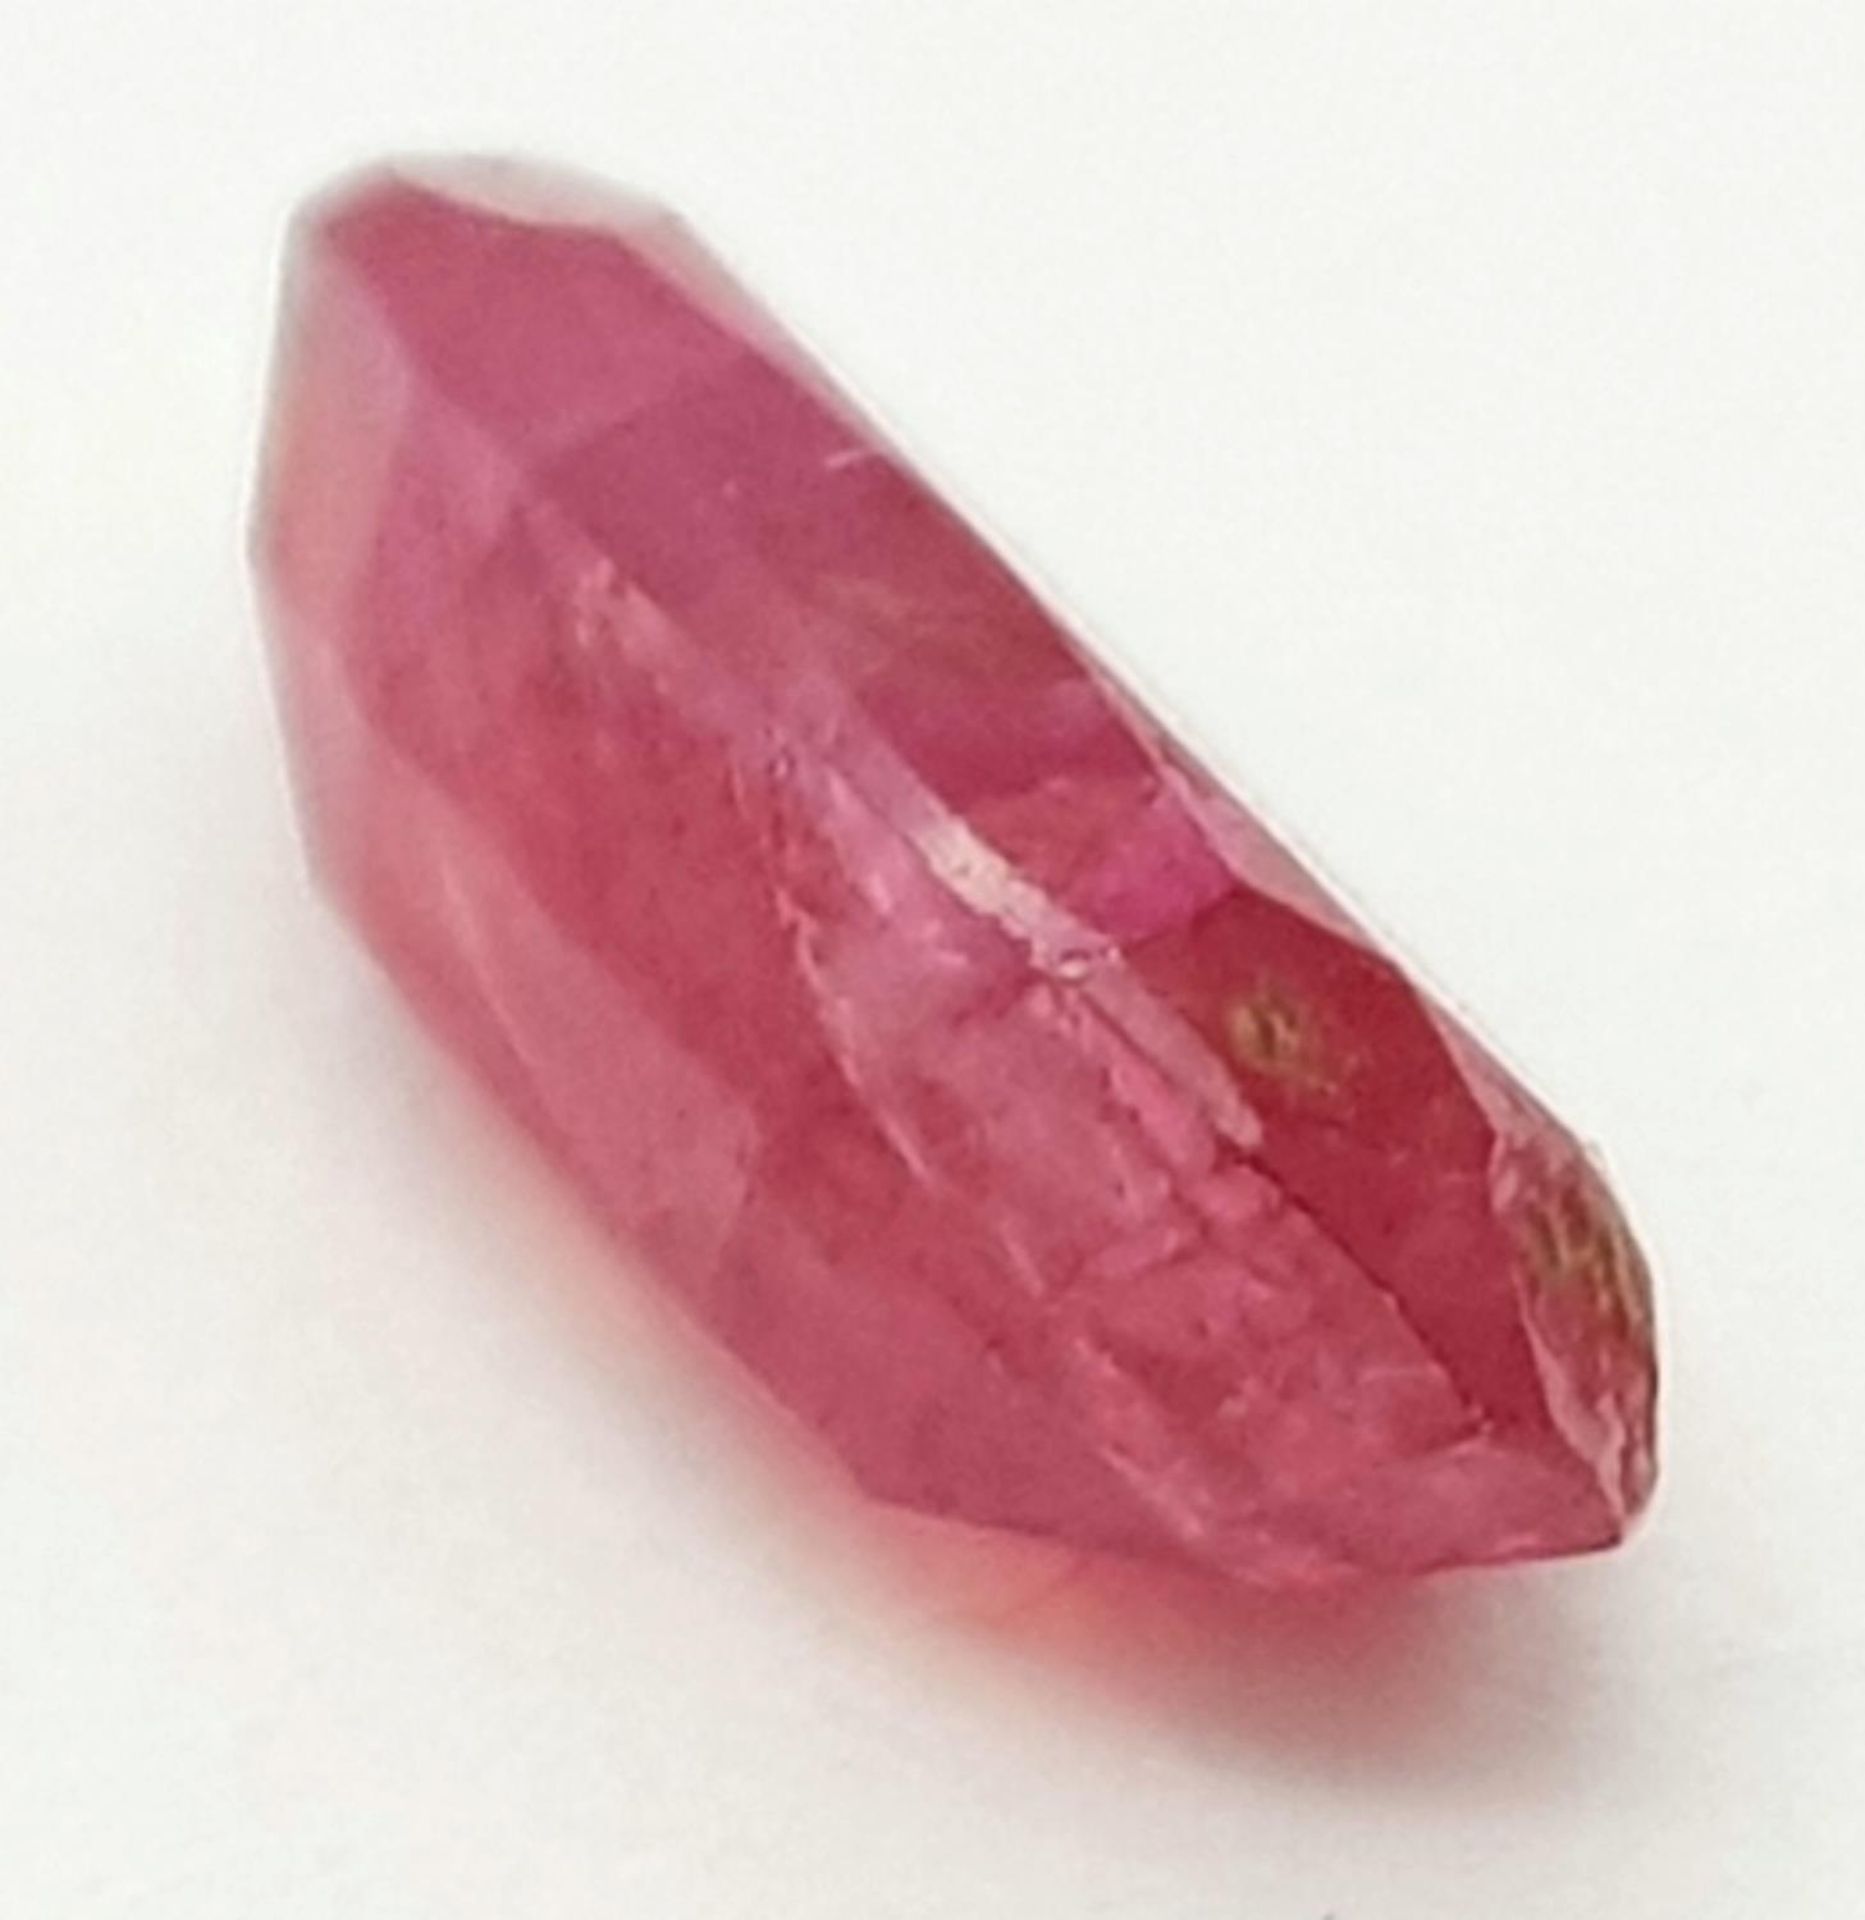 A 1.47ct Untreated Mozambique Ruby Gemstone - GFCO Swiss Certified. - Image 3 of 5